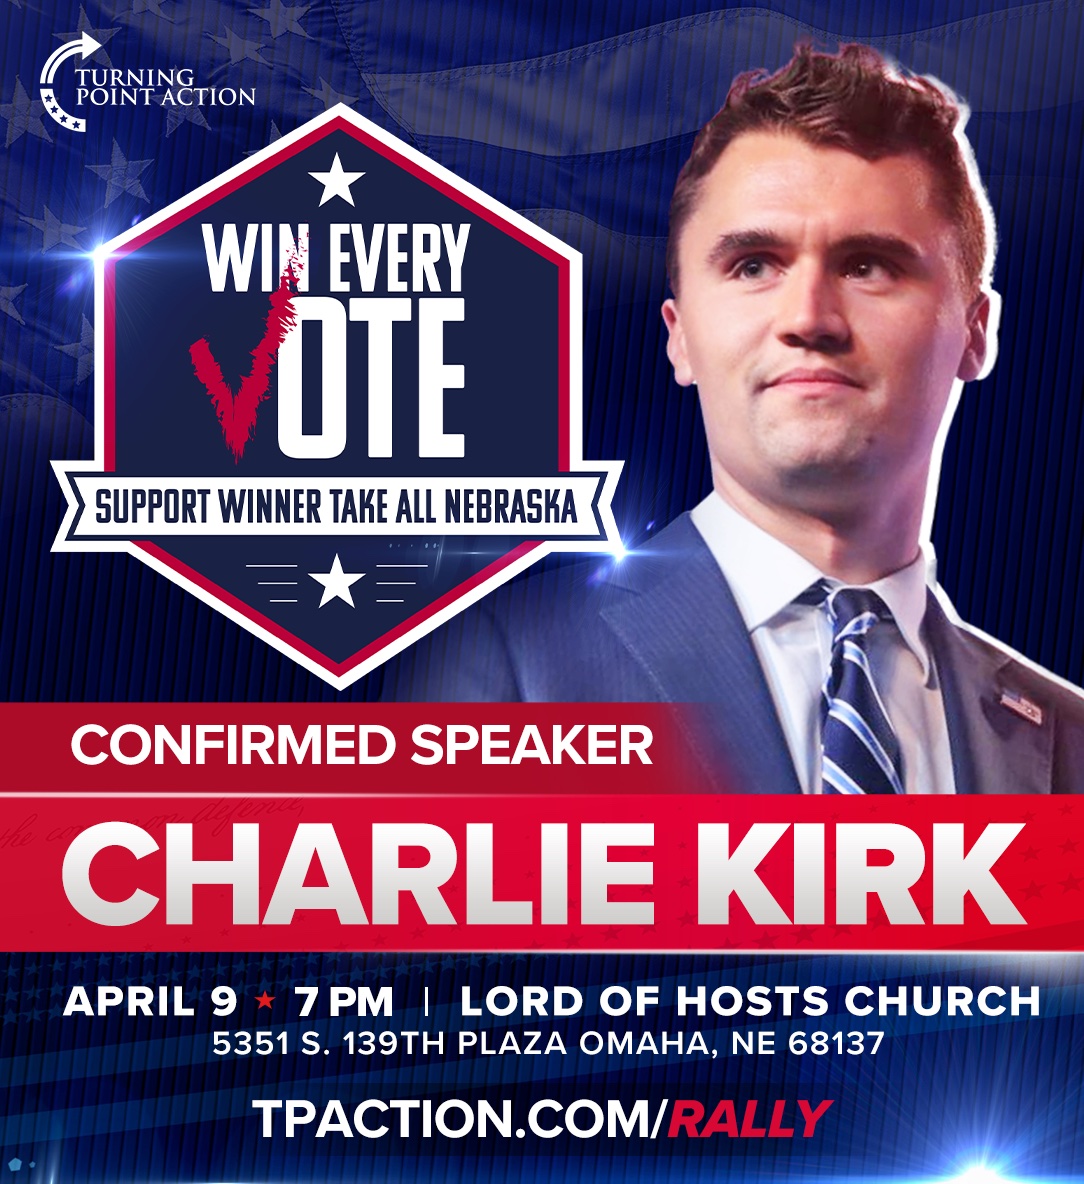 Join us in #Omaha at #LORDOFHOST #CHURCH for the
@TPAction_ with #CHARLIEKIRK WIN EVERY VOTE RALLY next week in support of moving #Nebraska to a winner-take-all electoral college state.

Register at TPAction.com/Rally

Let's go!!

Read Here: x.com/charliekirk11/…